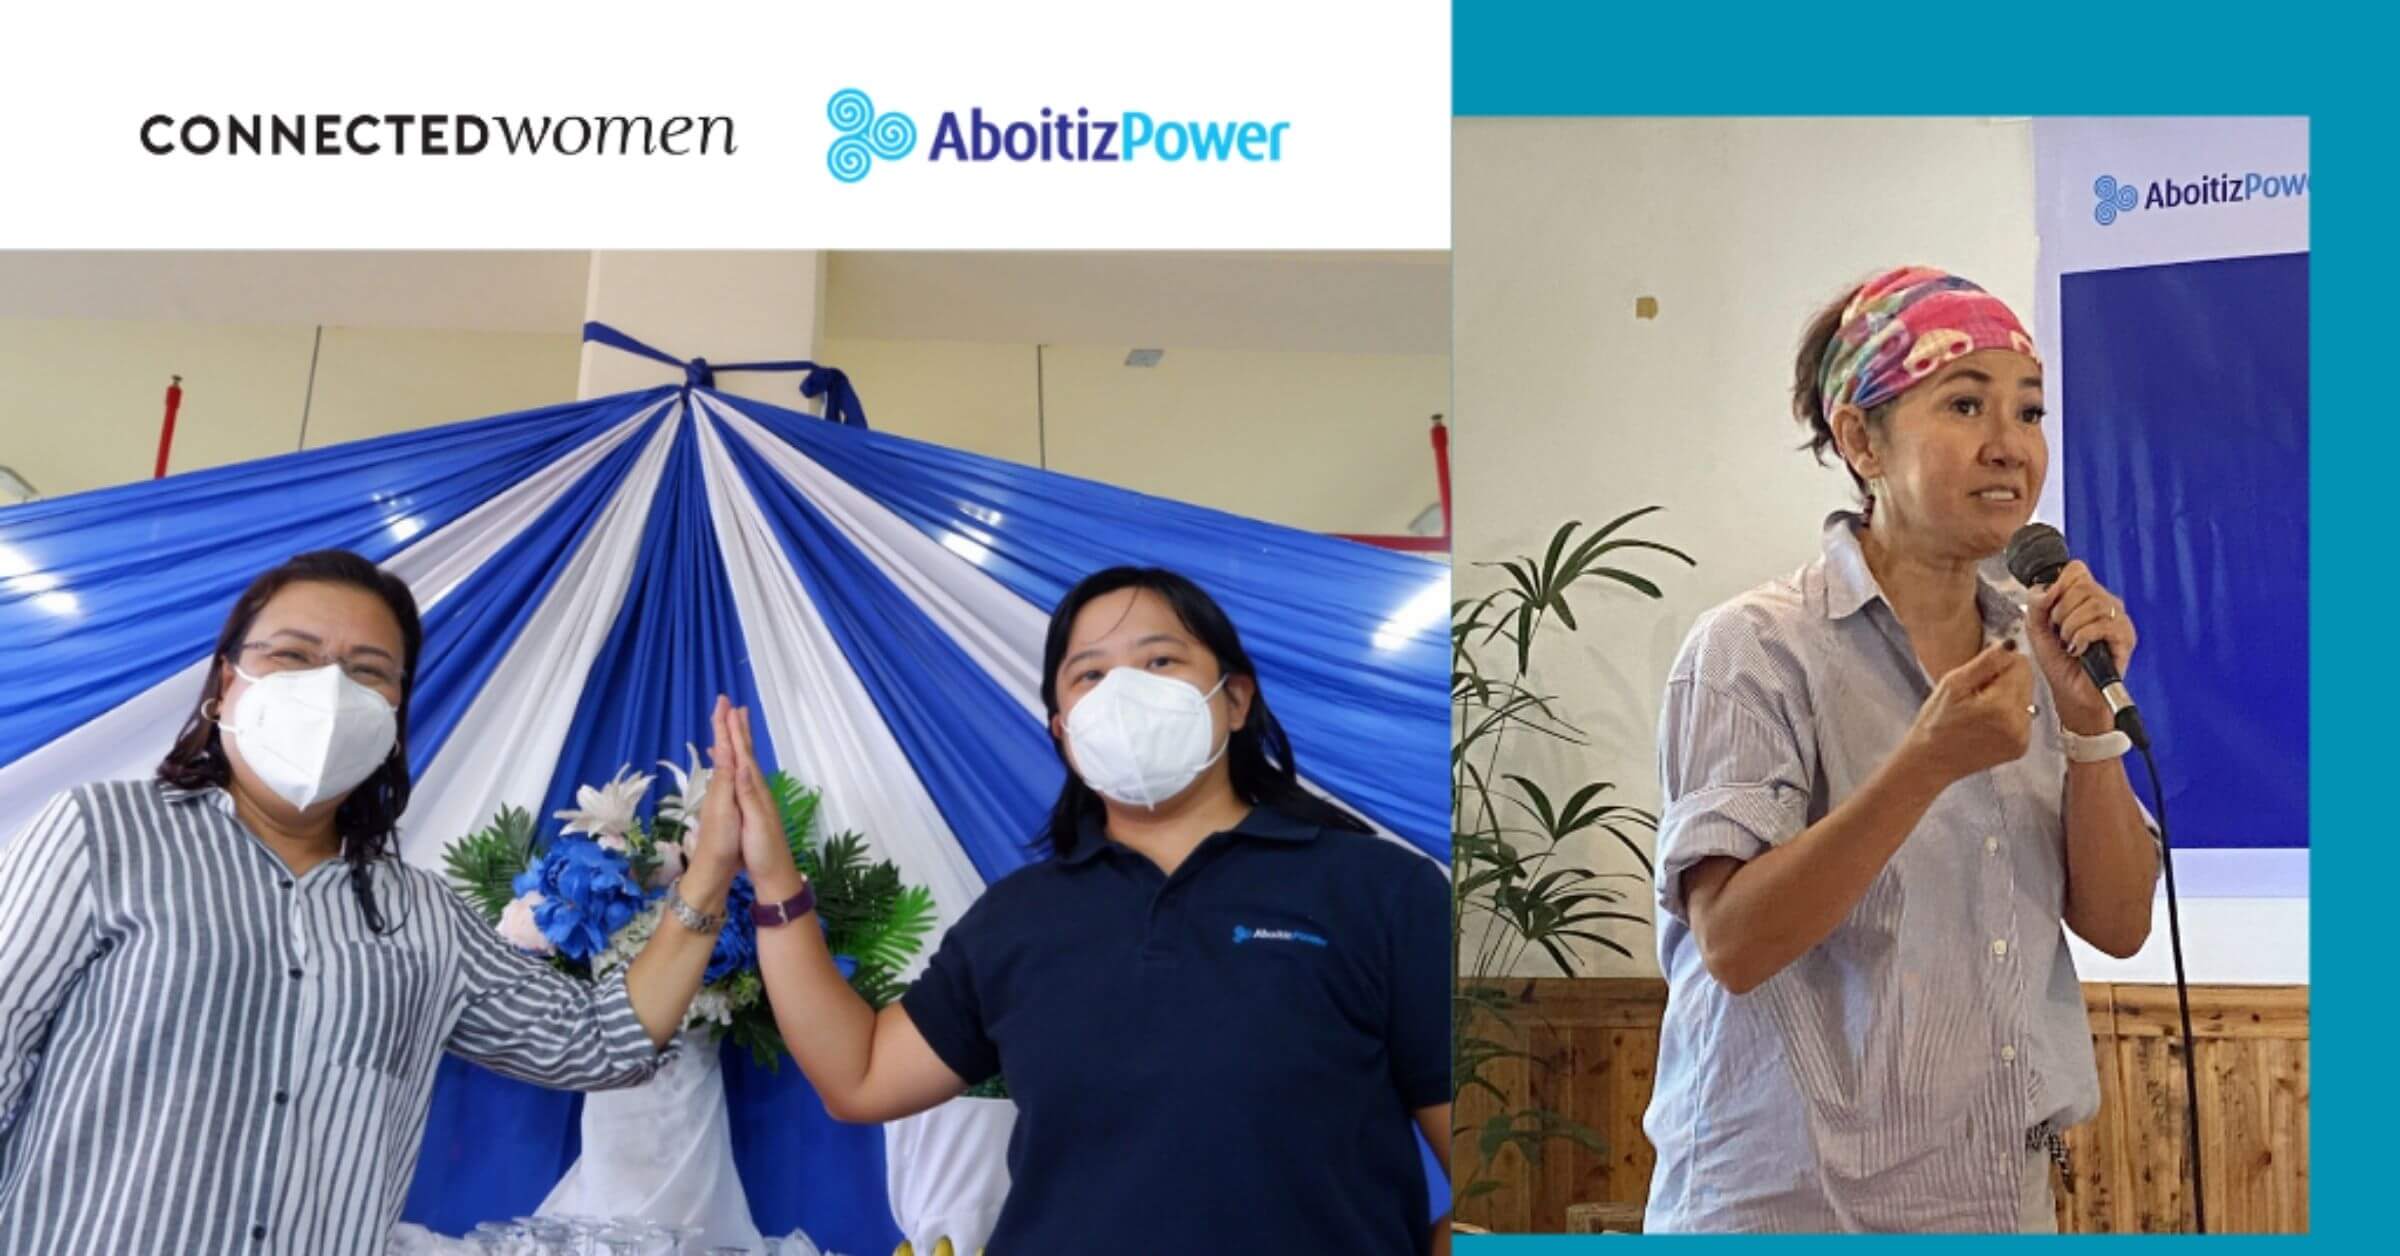 (From left) Toledo City Mayor Marjorie “Joie” Perales, AboitizPower Coal Business Unit Vice President for Corporate Services Ginger Tanchi and Connected Women co-founder Ruth Yu- Owen at the MOA signing in Barangay Bato in Toledo City last March 23, 2022.